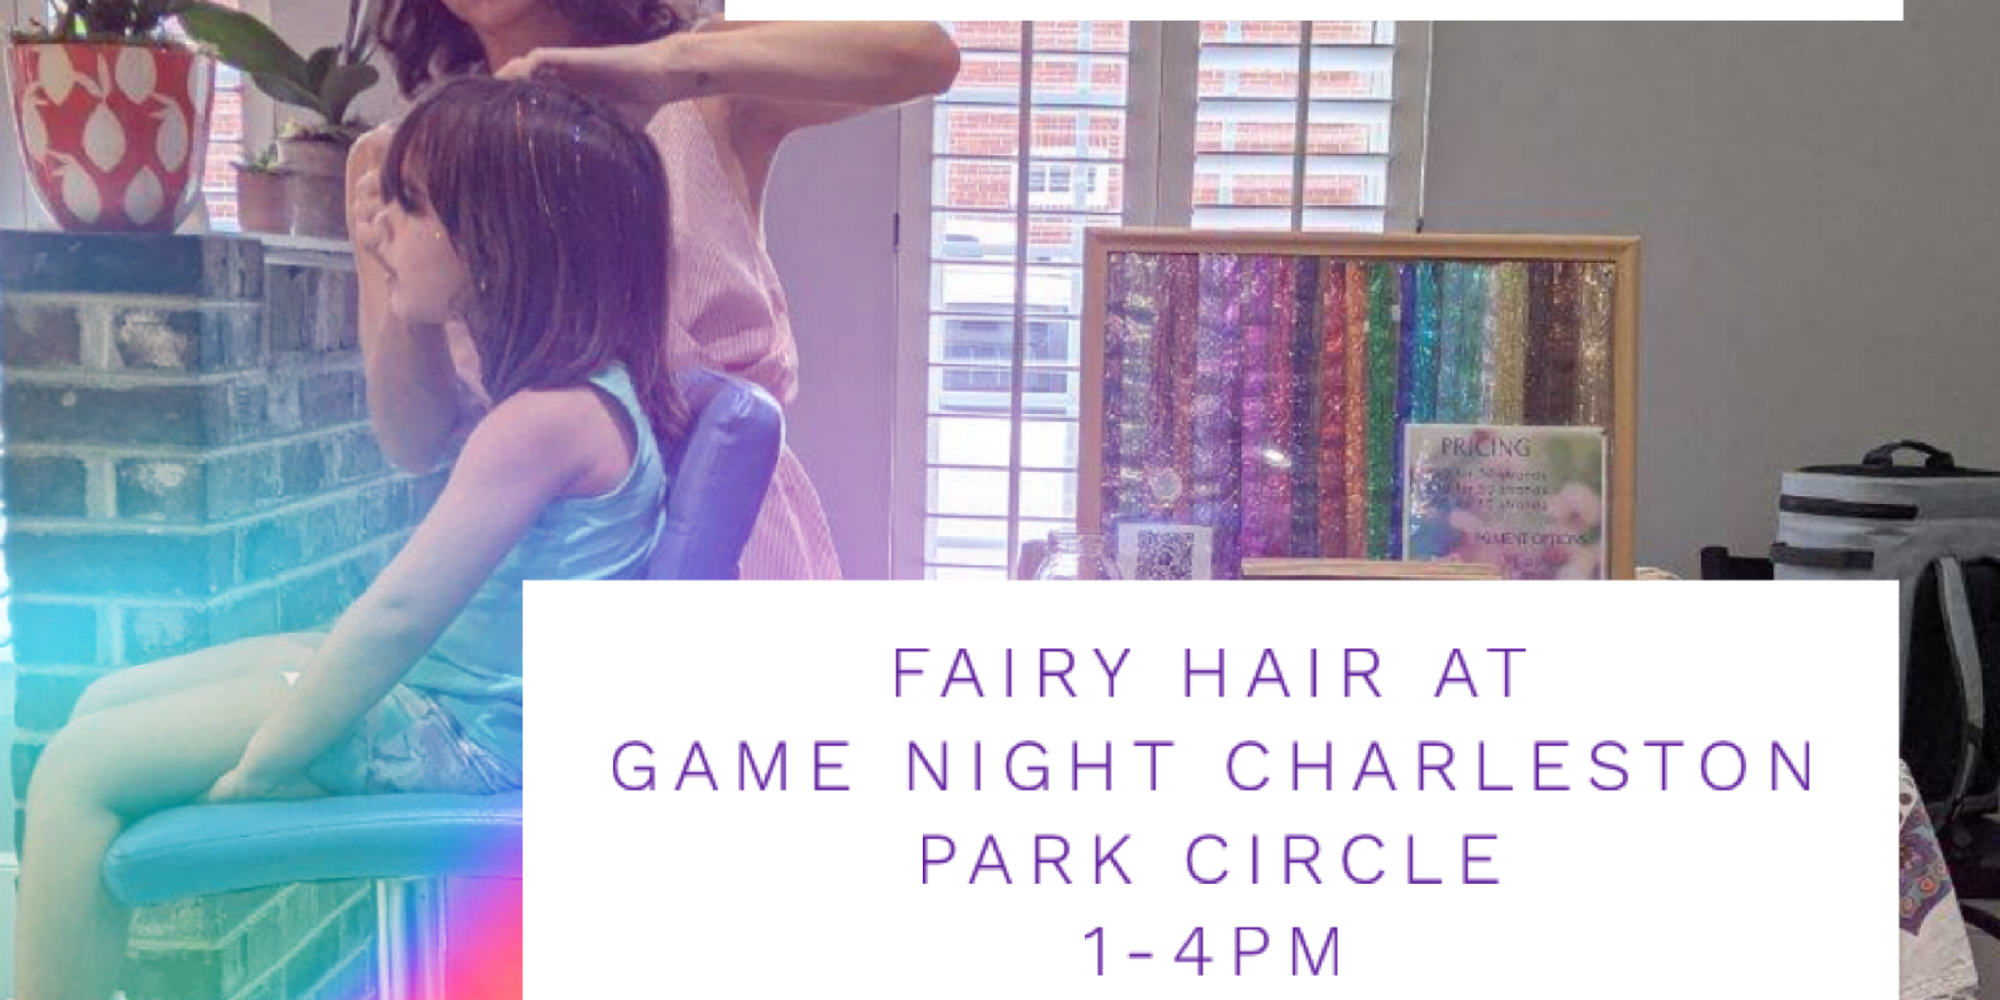 Fairy Hair in Park Circle at Game Night Charelston promotional image